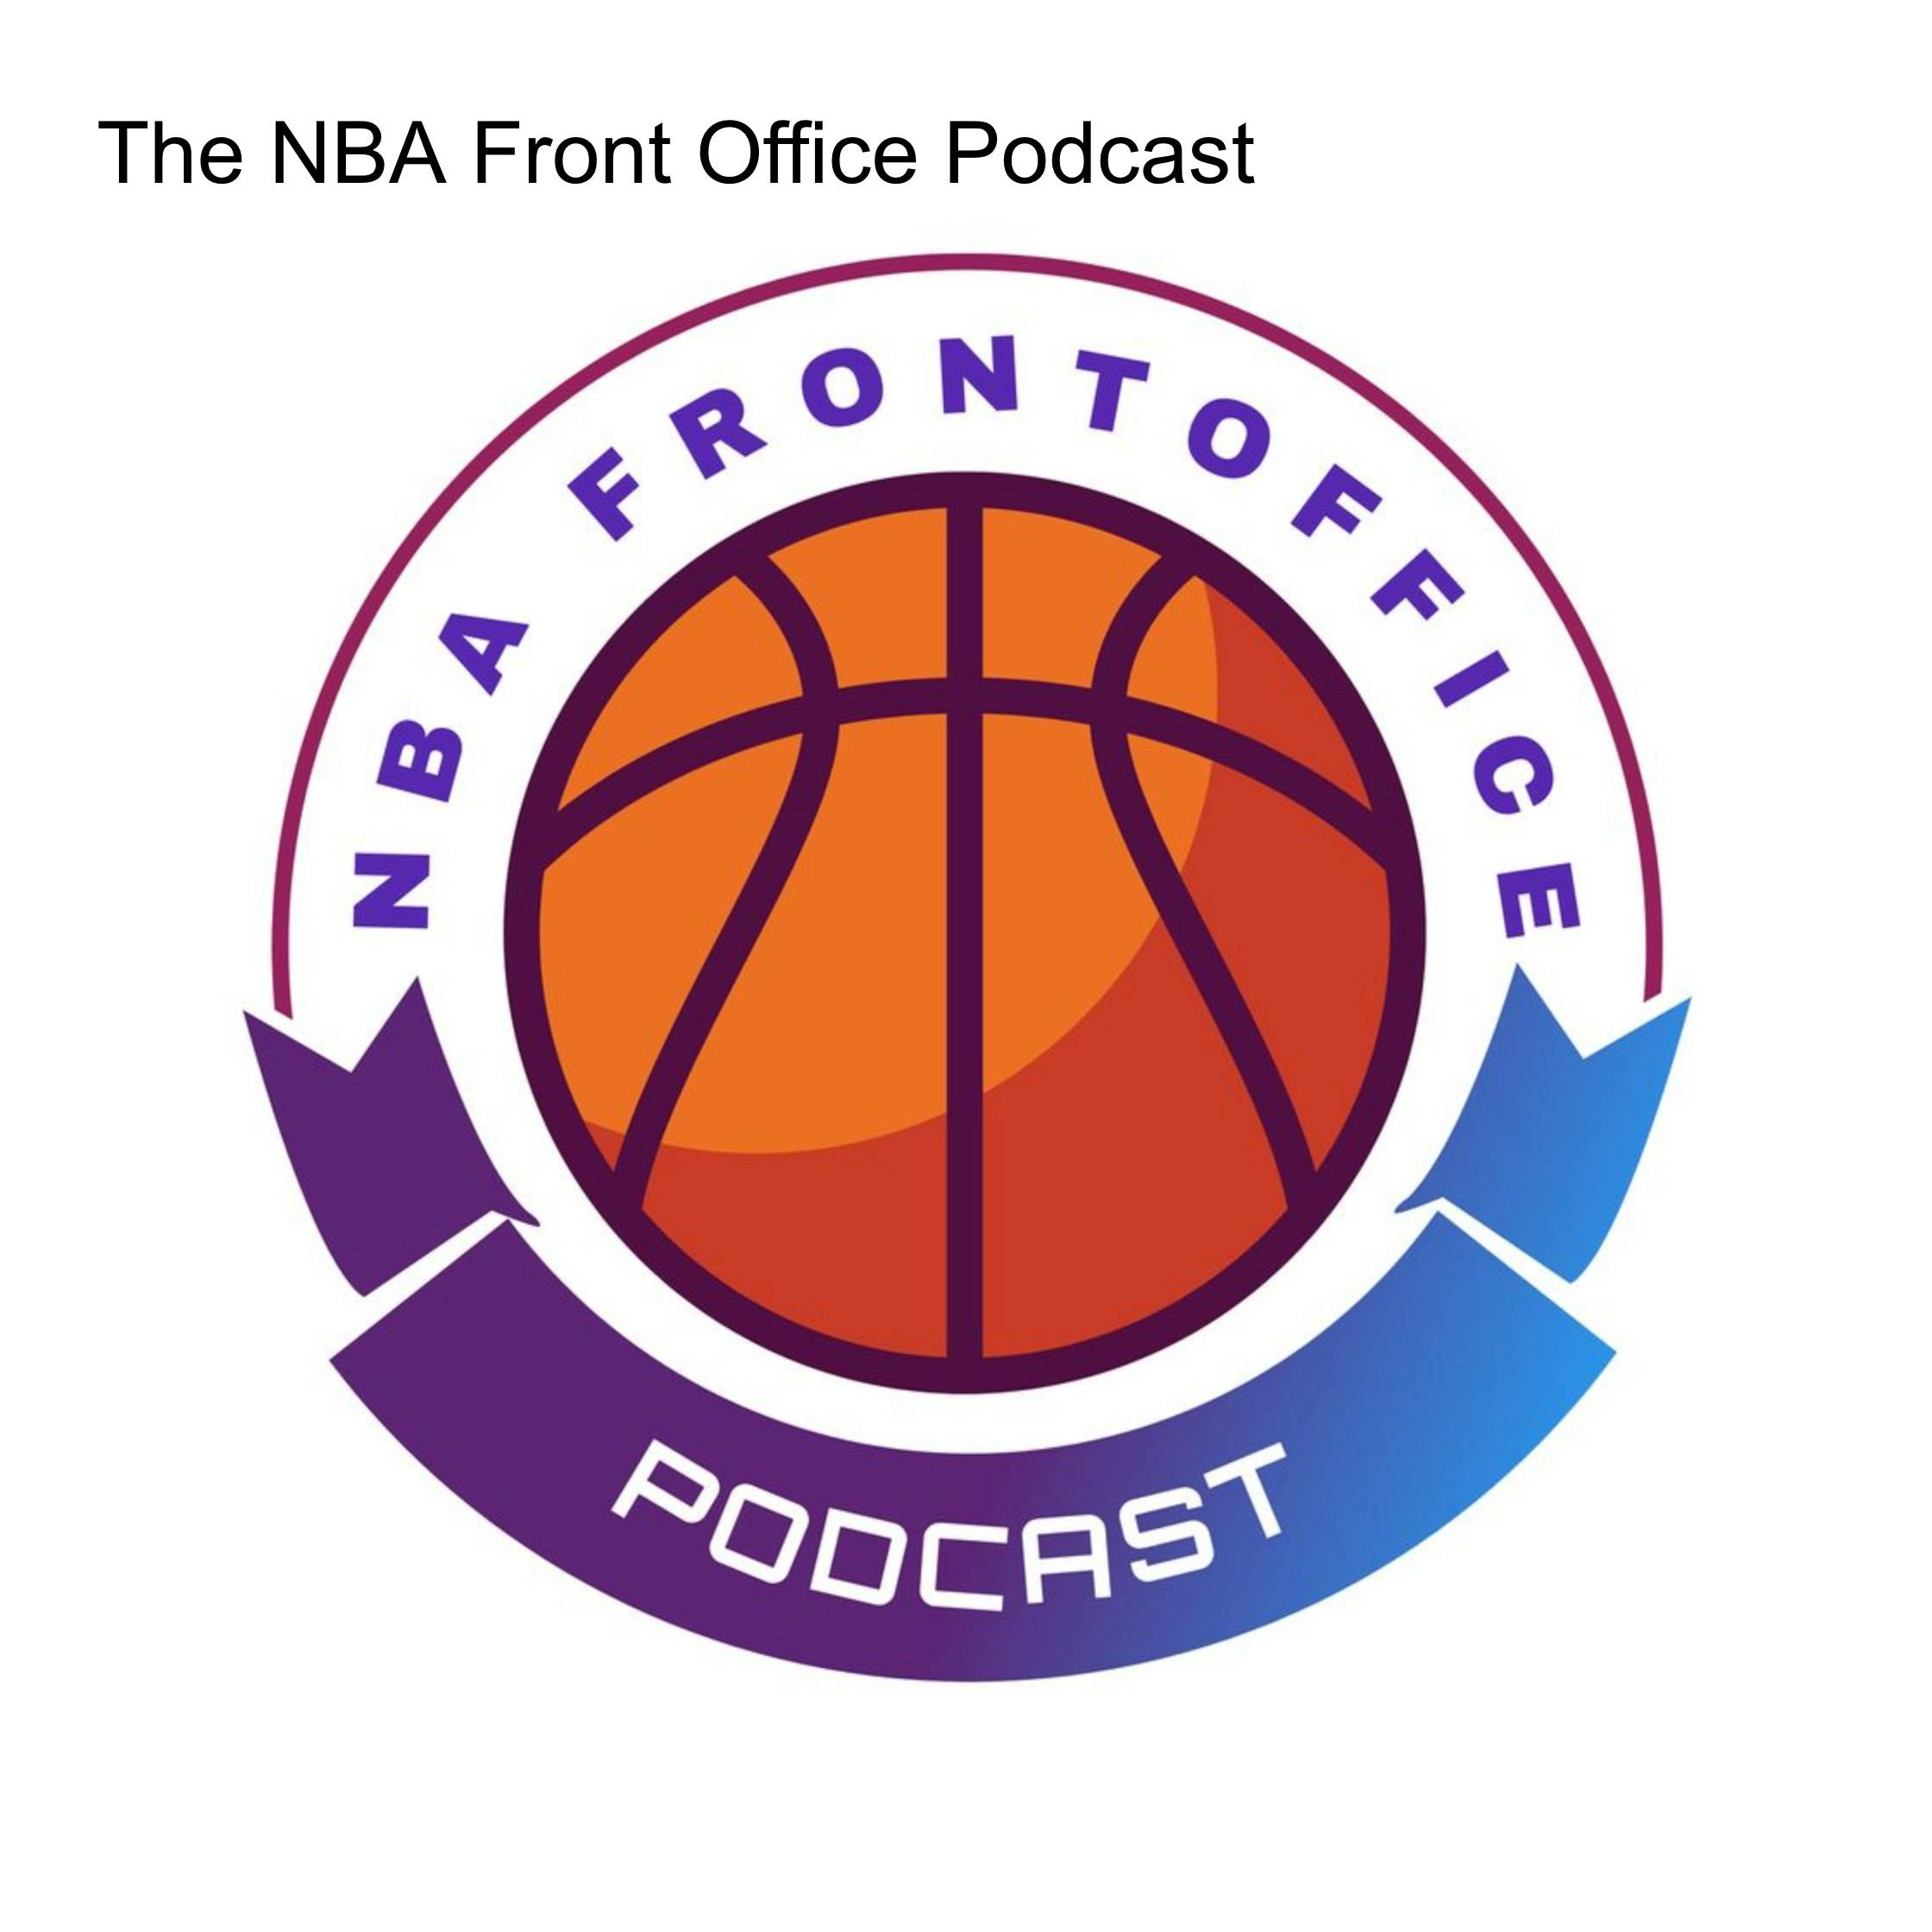 Jontay Porter Banned For Life, End Of The Warriors?, Team USA Snubs & More